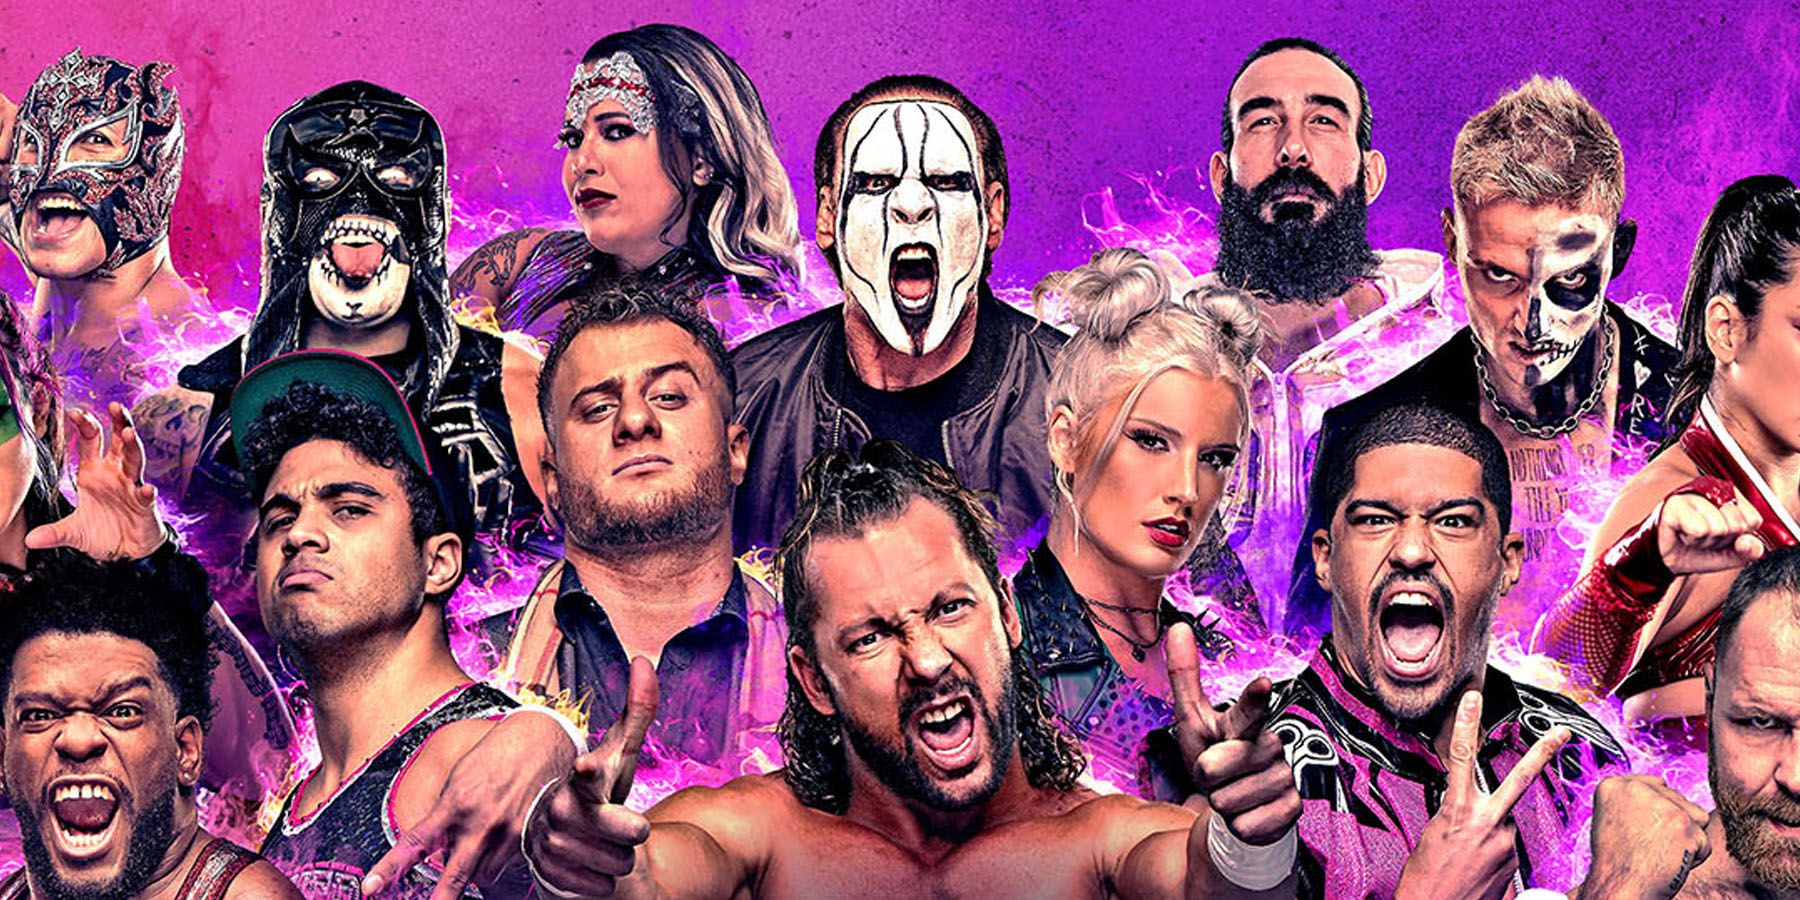 A promotional image featuring various AEW wrestlers in AEW Fight Forever.